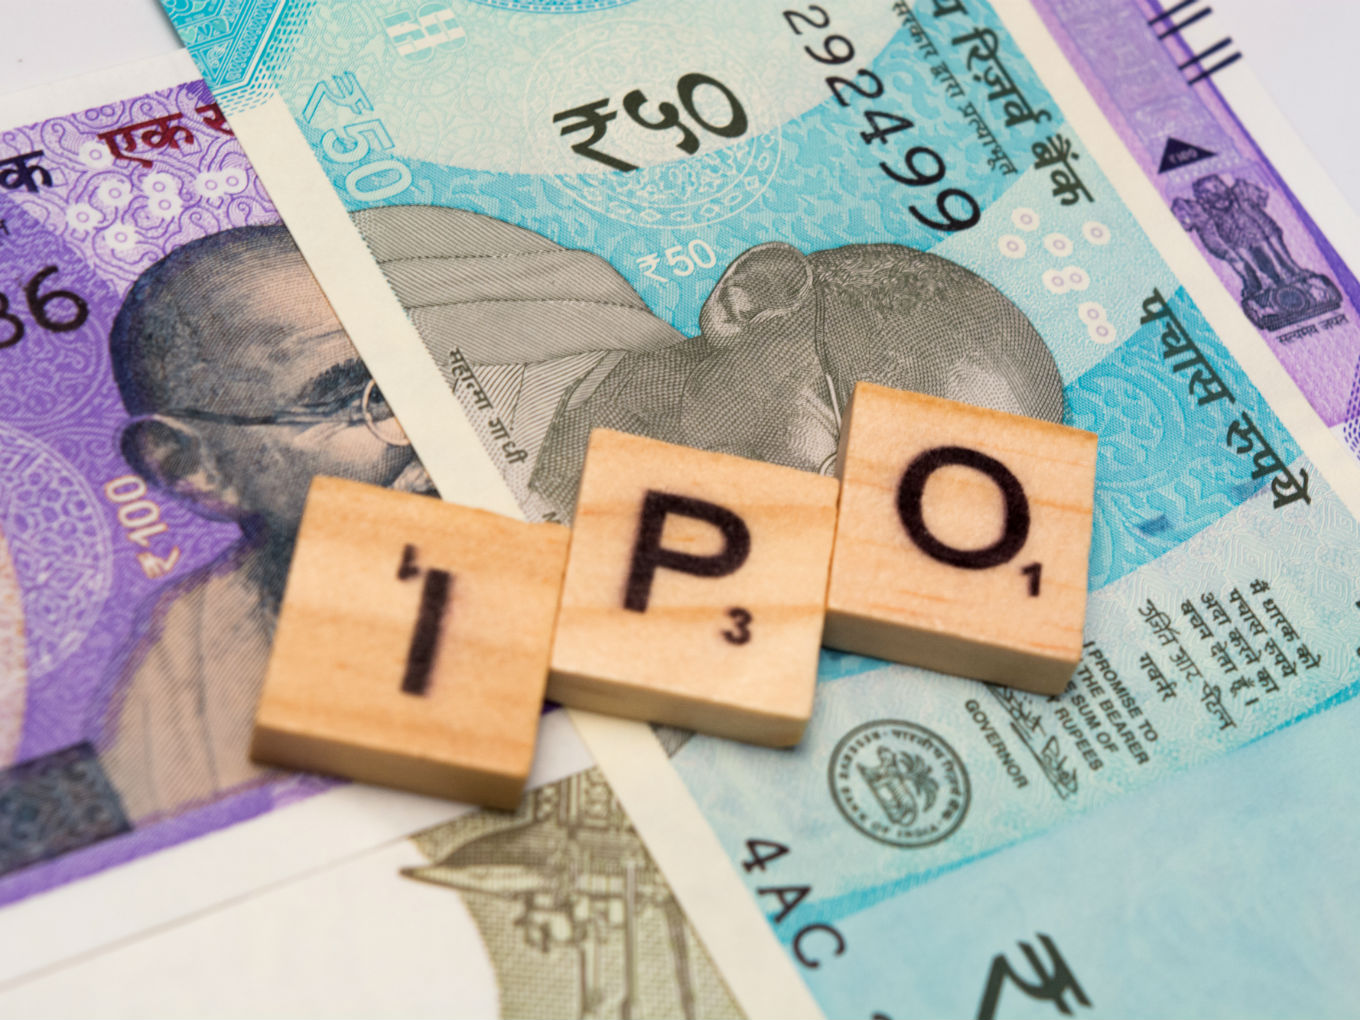 Startup Lobby Urges Sebi To Allow Confidential IPO Filing For Startups